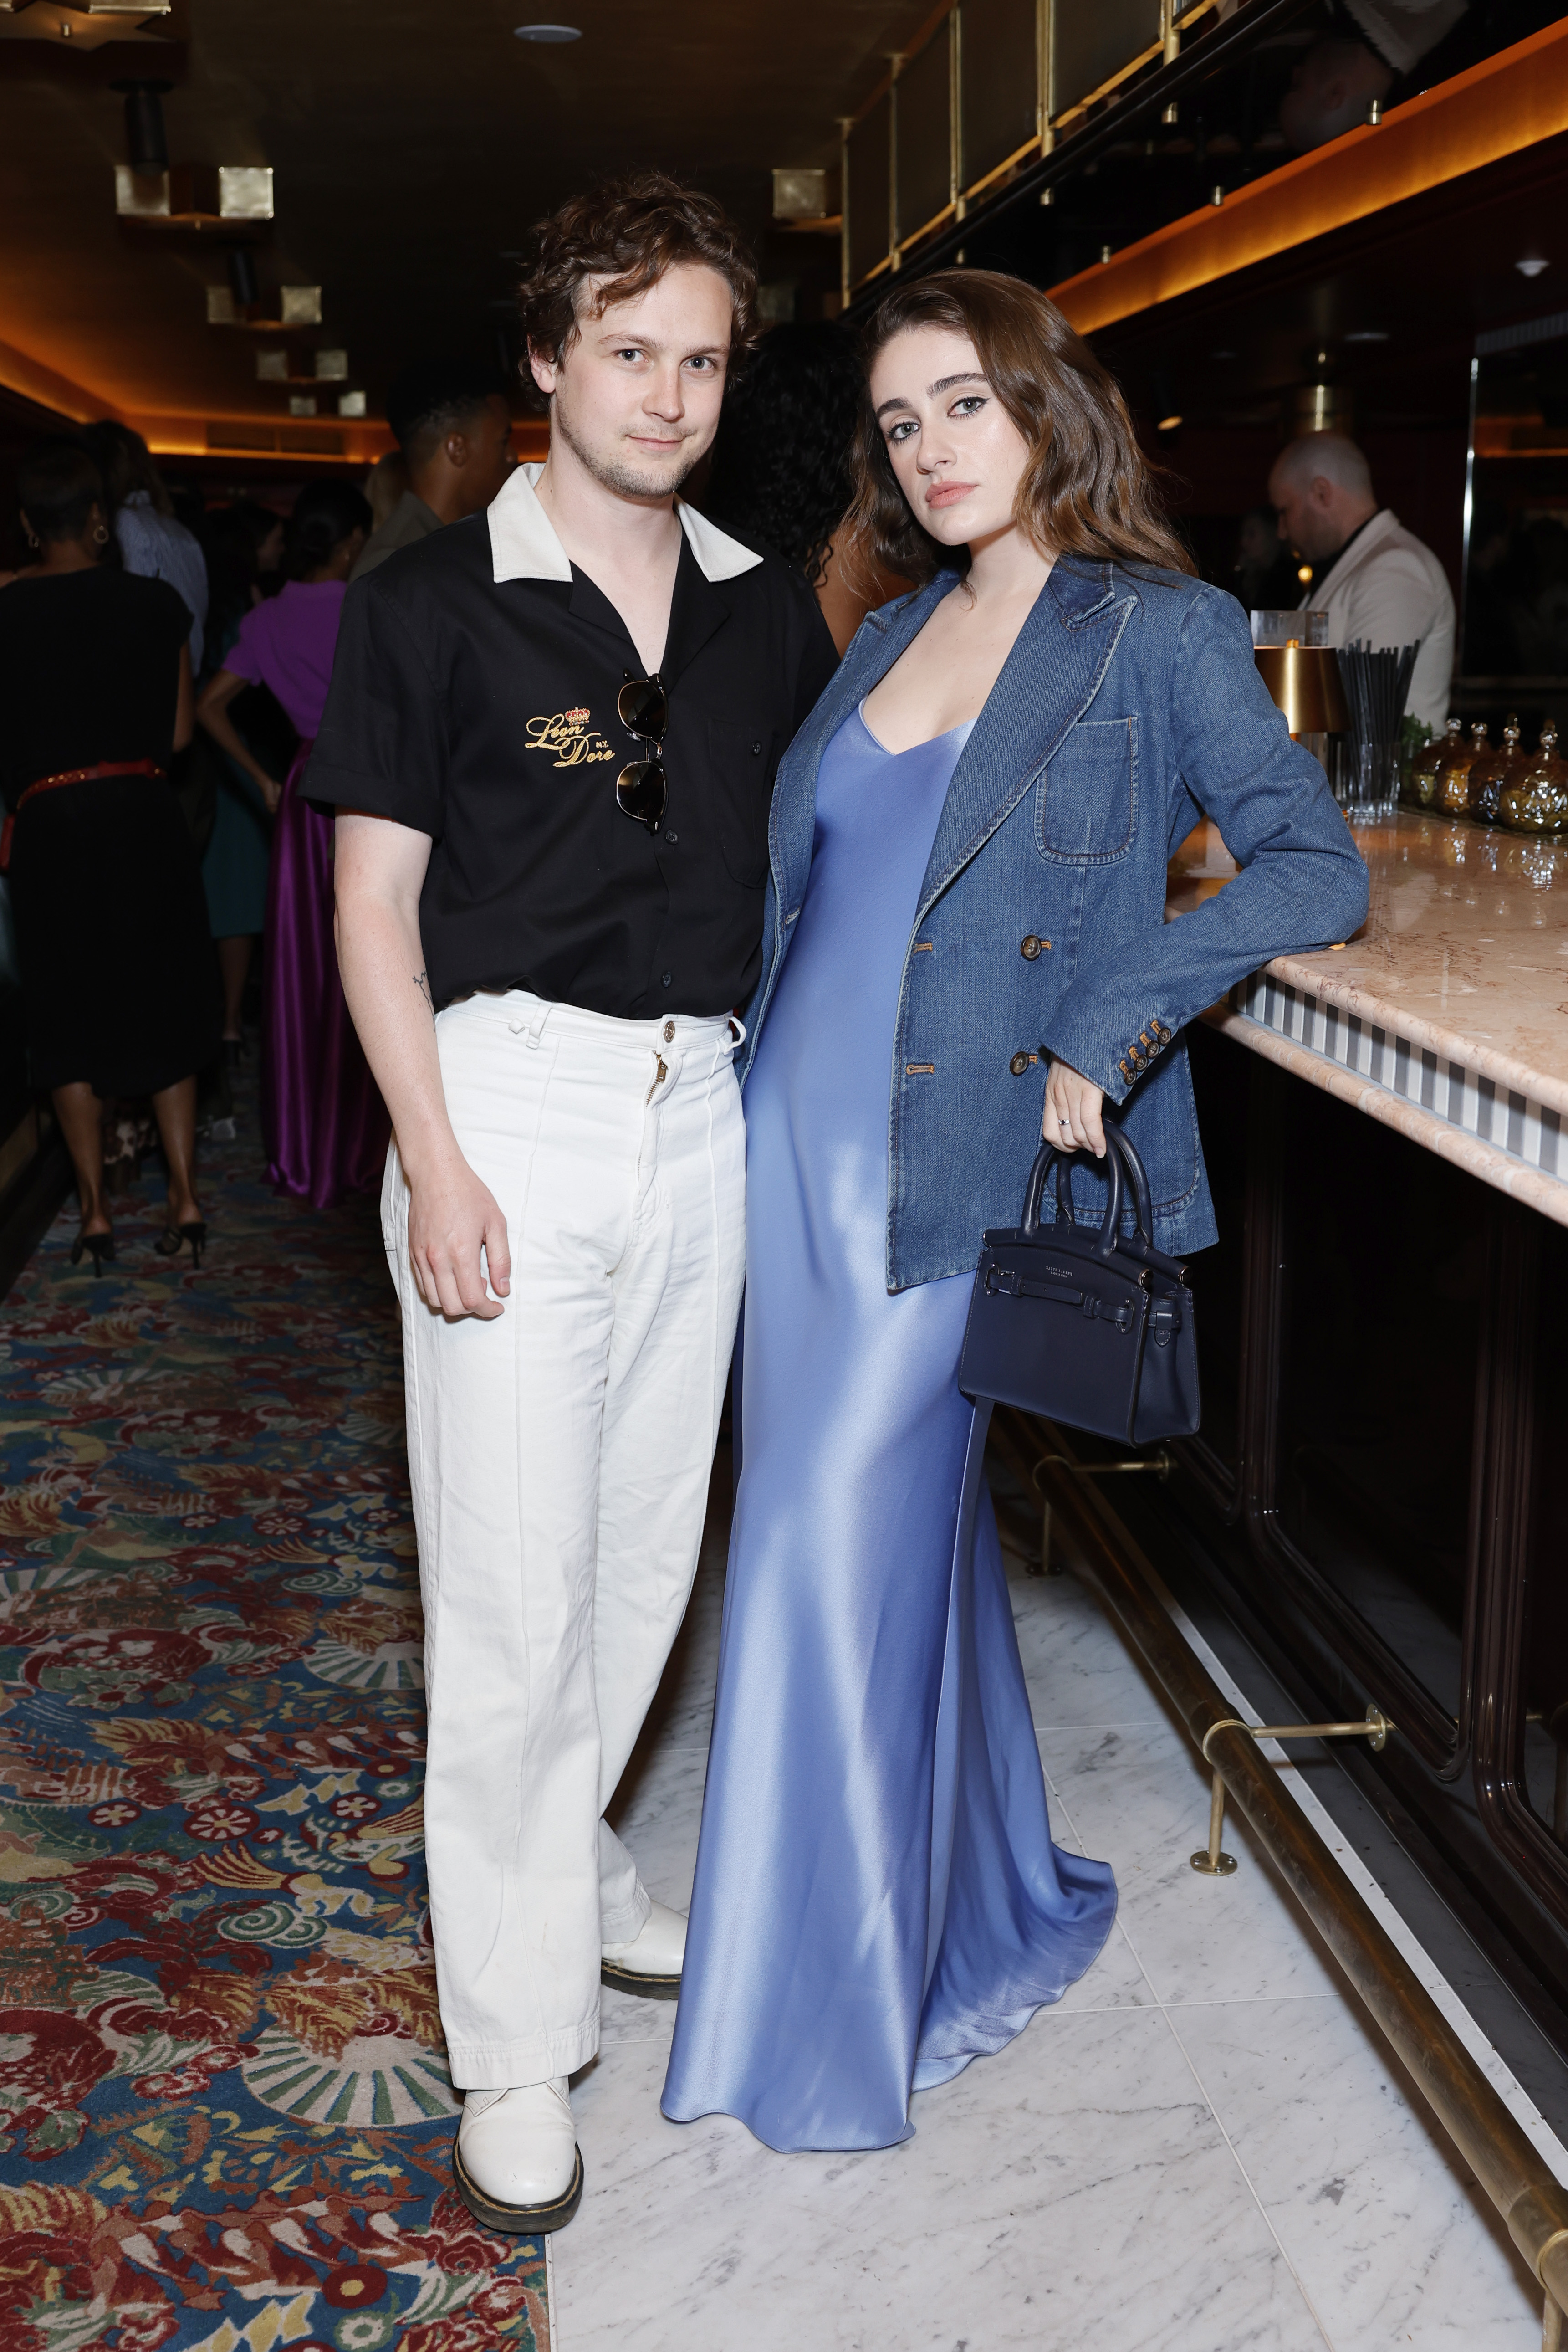 Rachel Sennott, wearing Polo Ralph Lauren (R) and a guest attend "ELLE Hollywood Rising" Presented by Polo Ralph Lauren at The Georgian Hotel on May 11, 2023 in Santa Monica, California. | Source: Getty Images